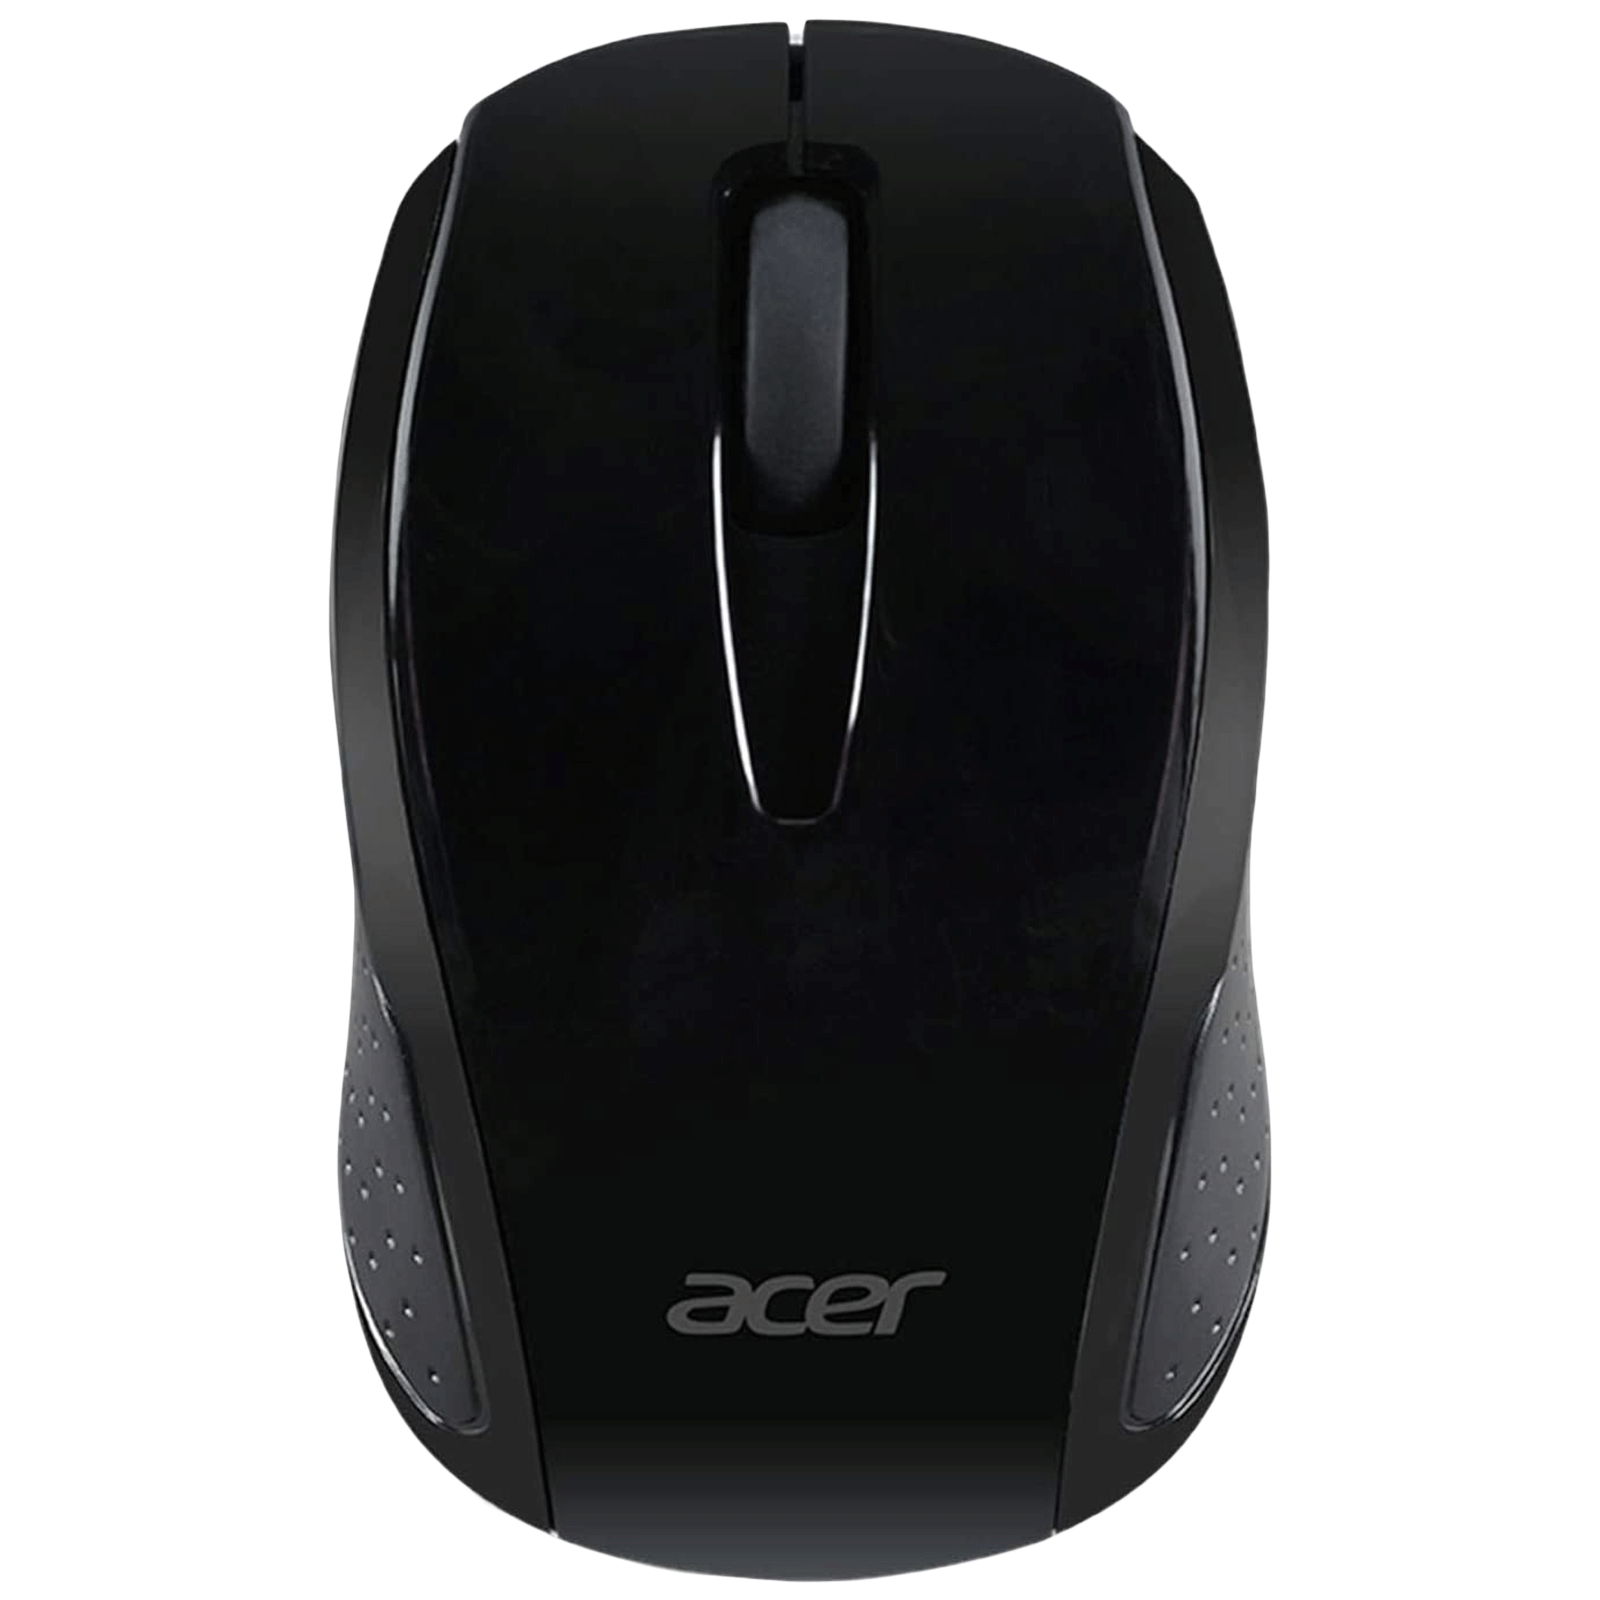 Acer Wireless Optical Gaming Mouse (Works with Chromebook, AMR800, Black)_1